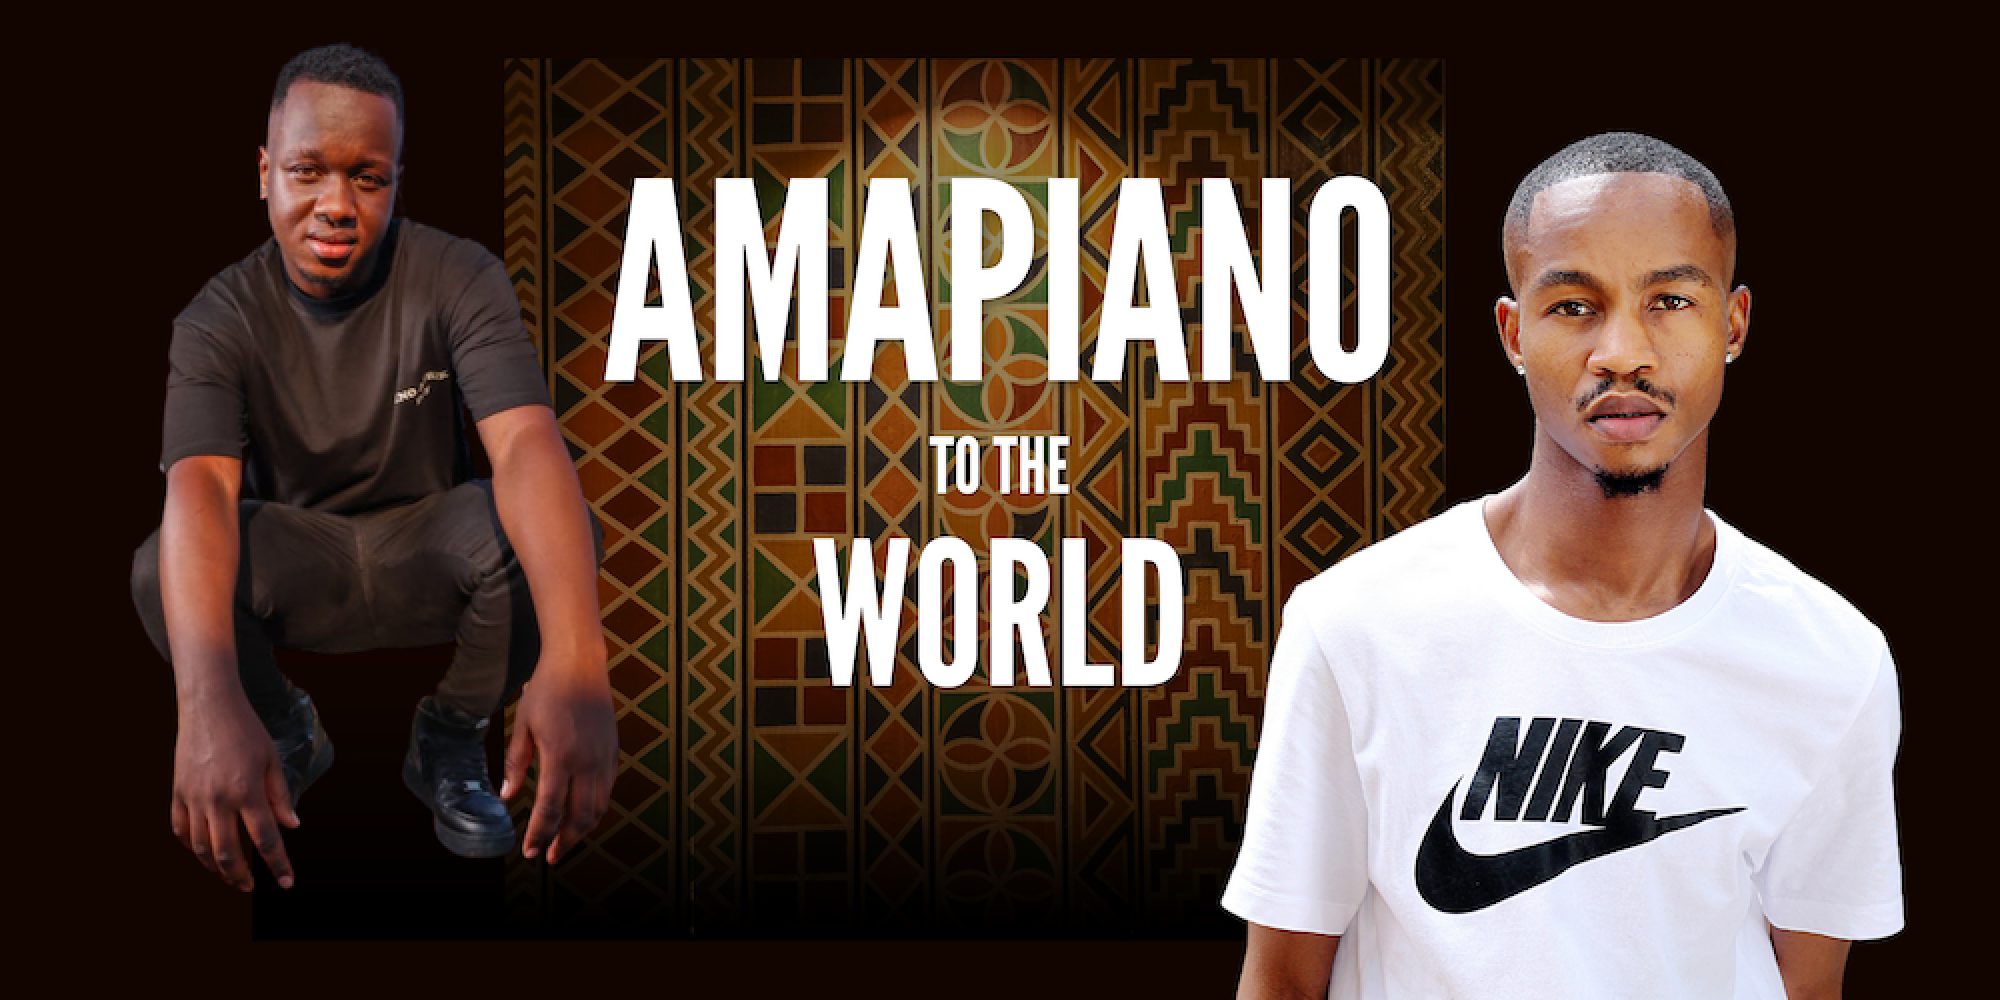 Amapiano to the World